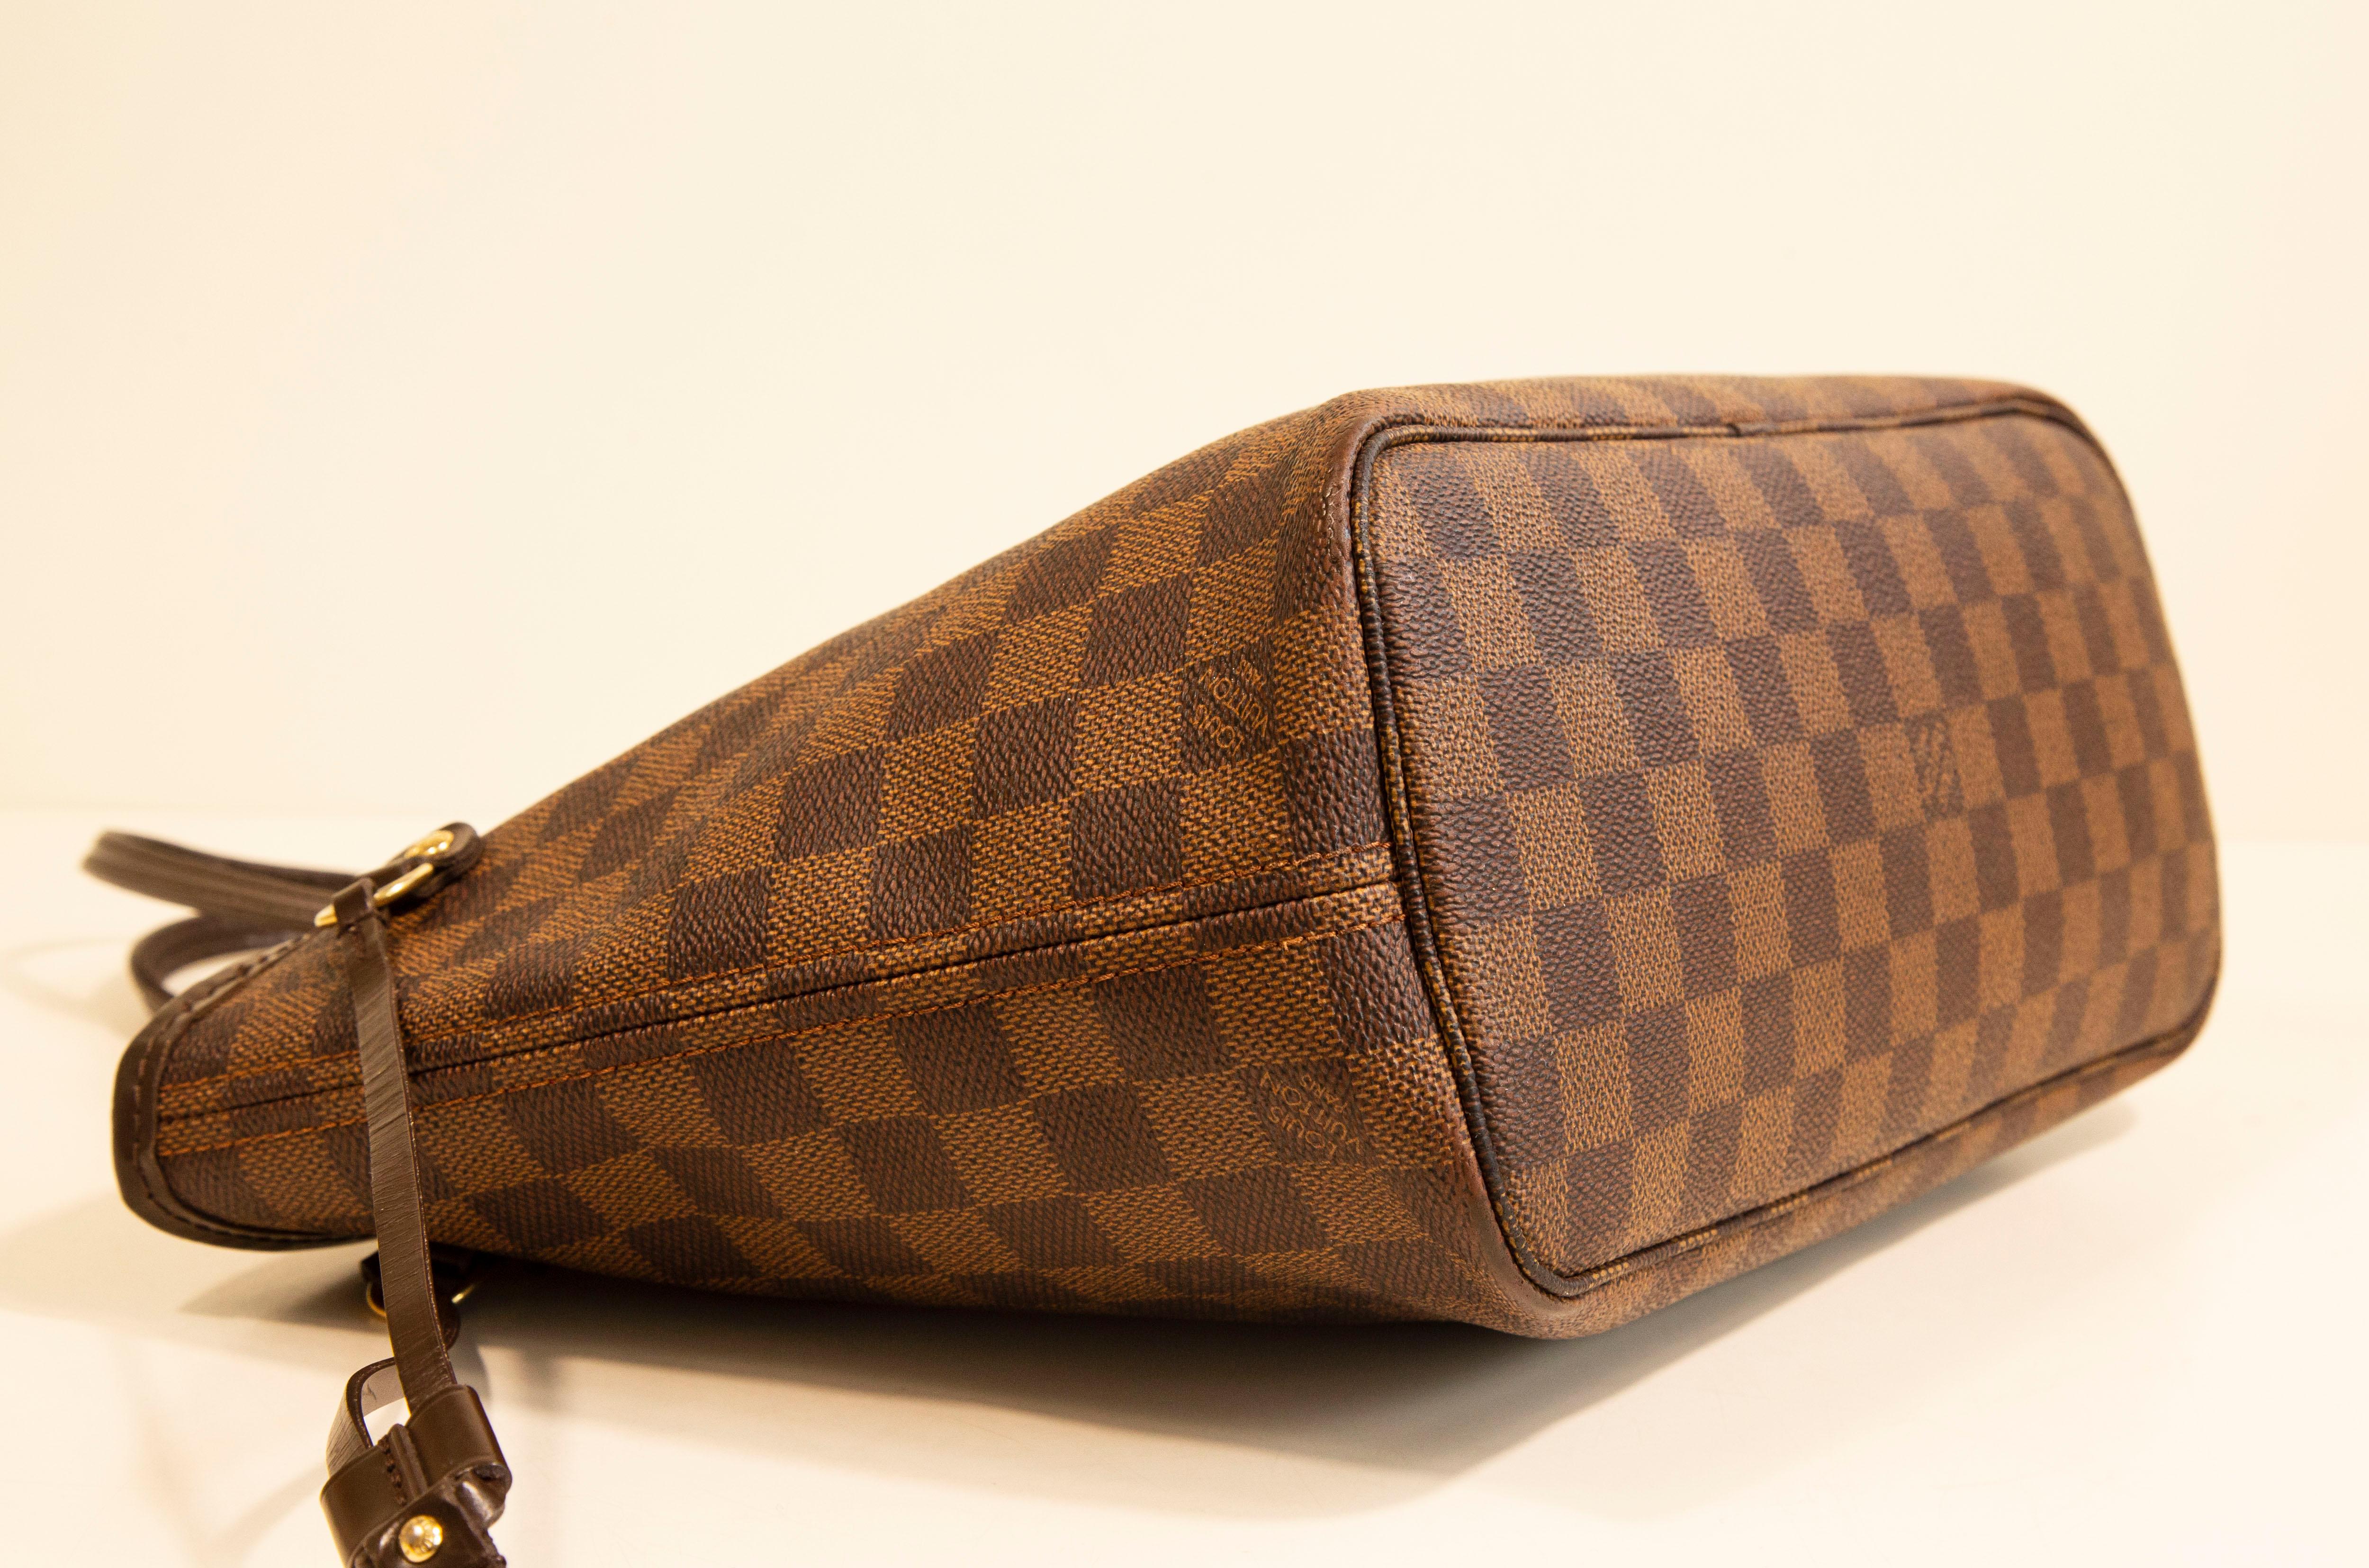 Louis Vuitton Neverfull PM Tote Shoulder Bag in Damier Ebene For Sale 9